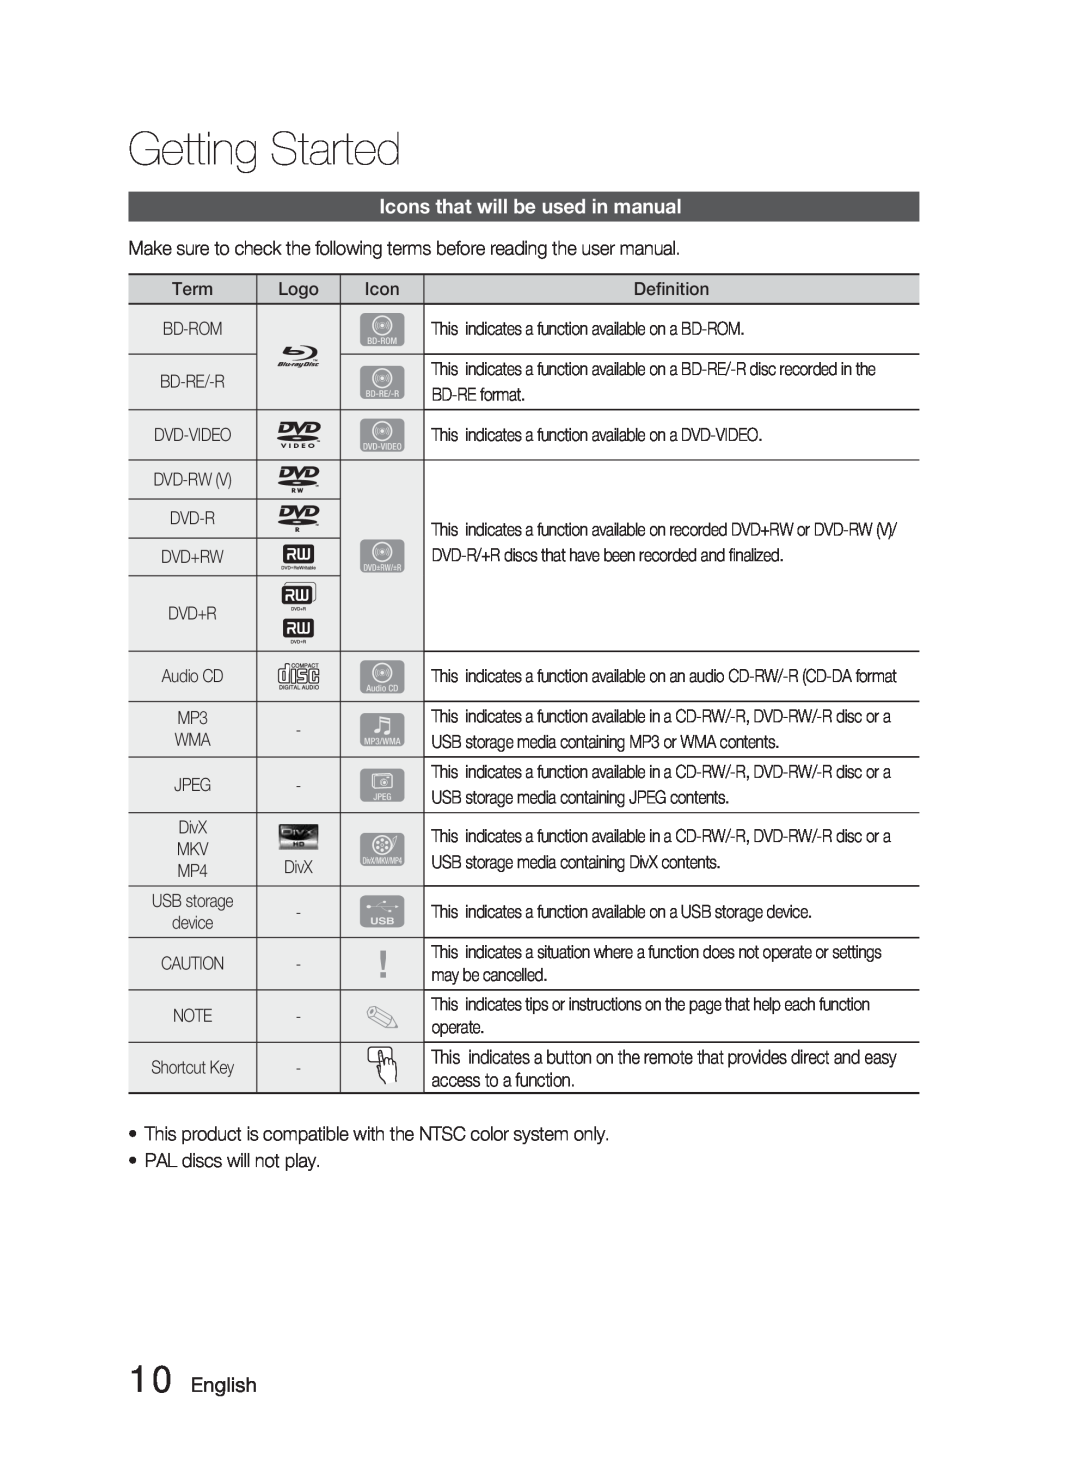 Samsung AH68-02279Y user manual Icons that will be used in manual, English, Getting Started 